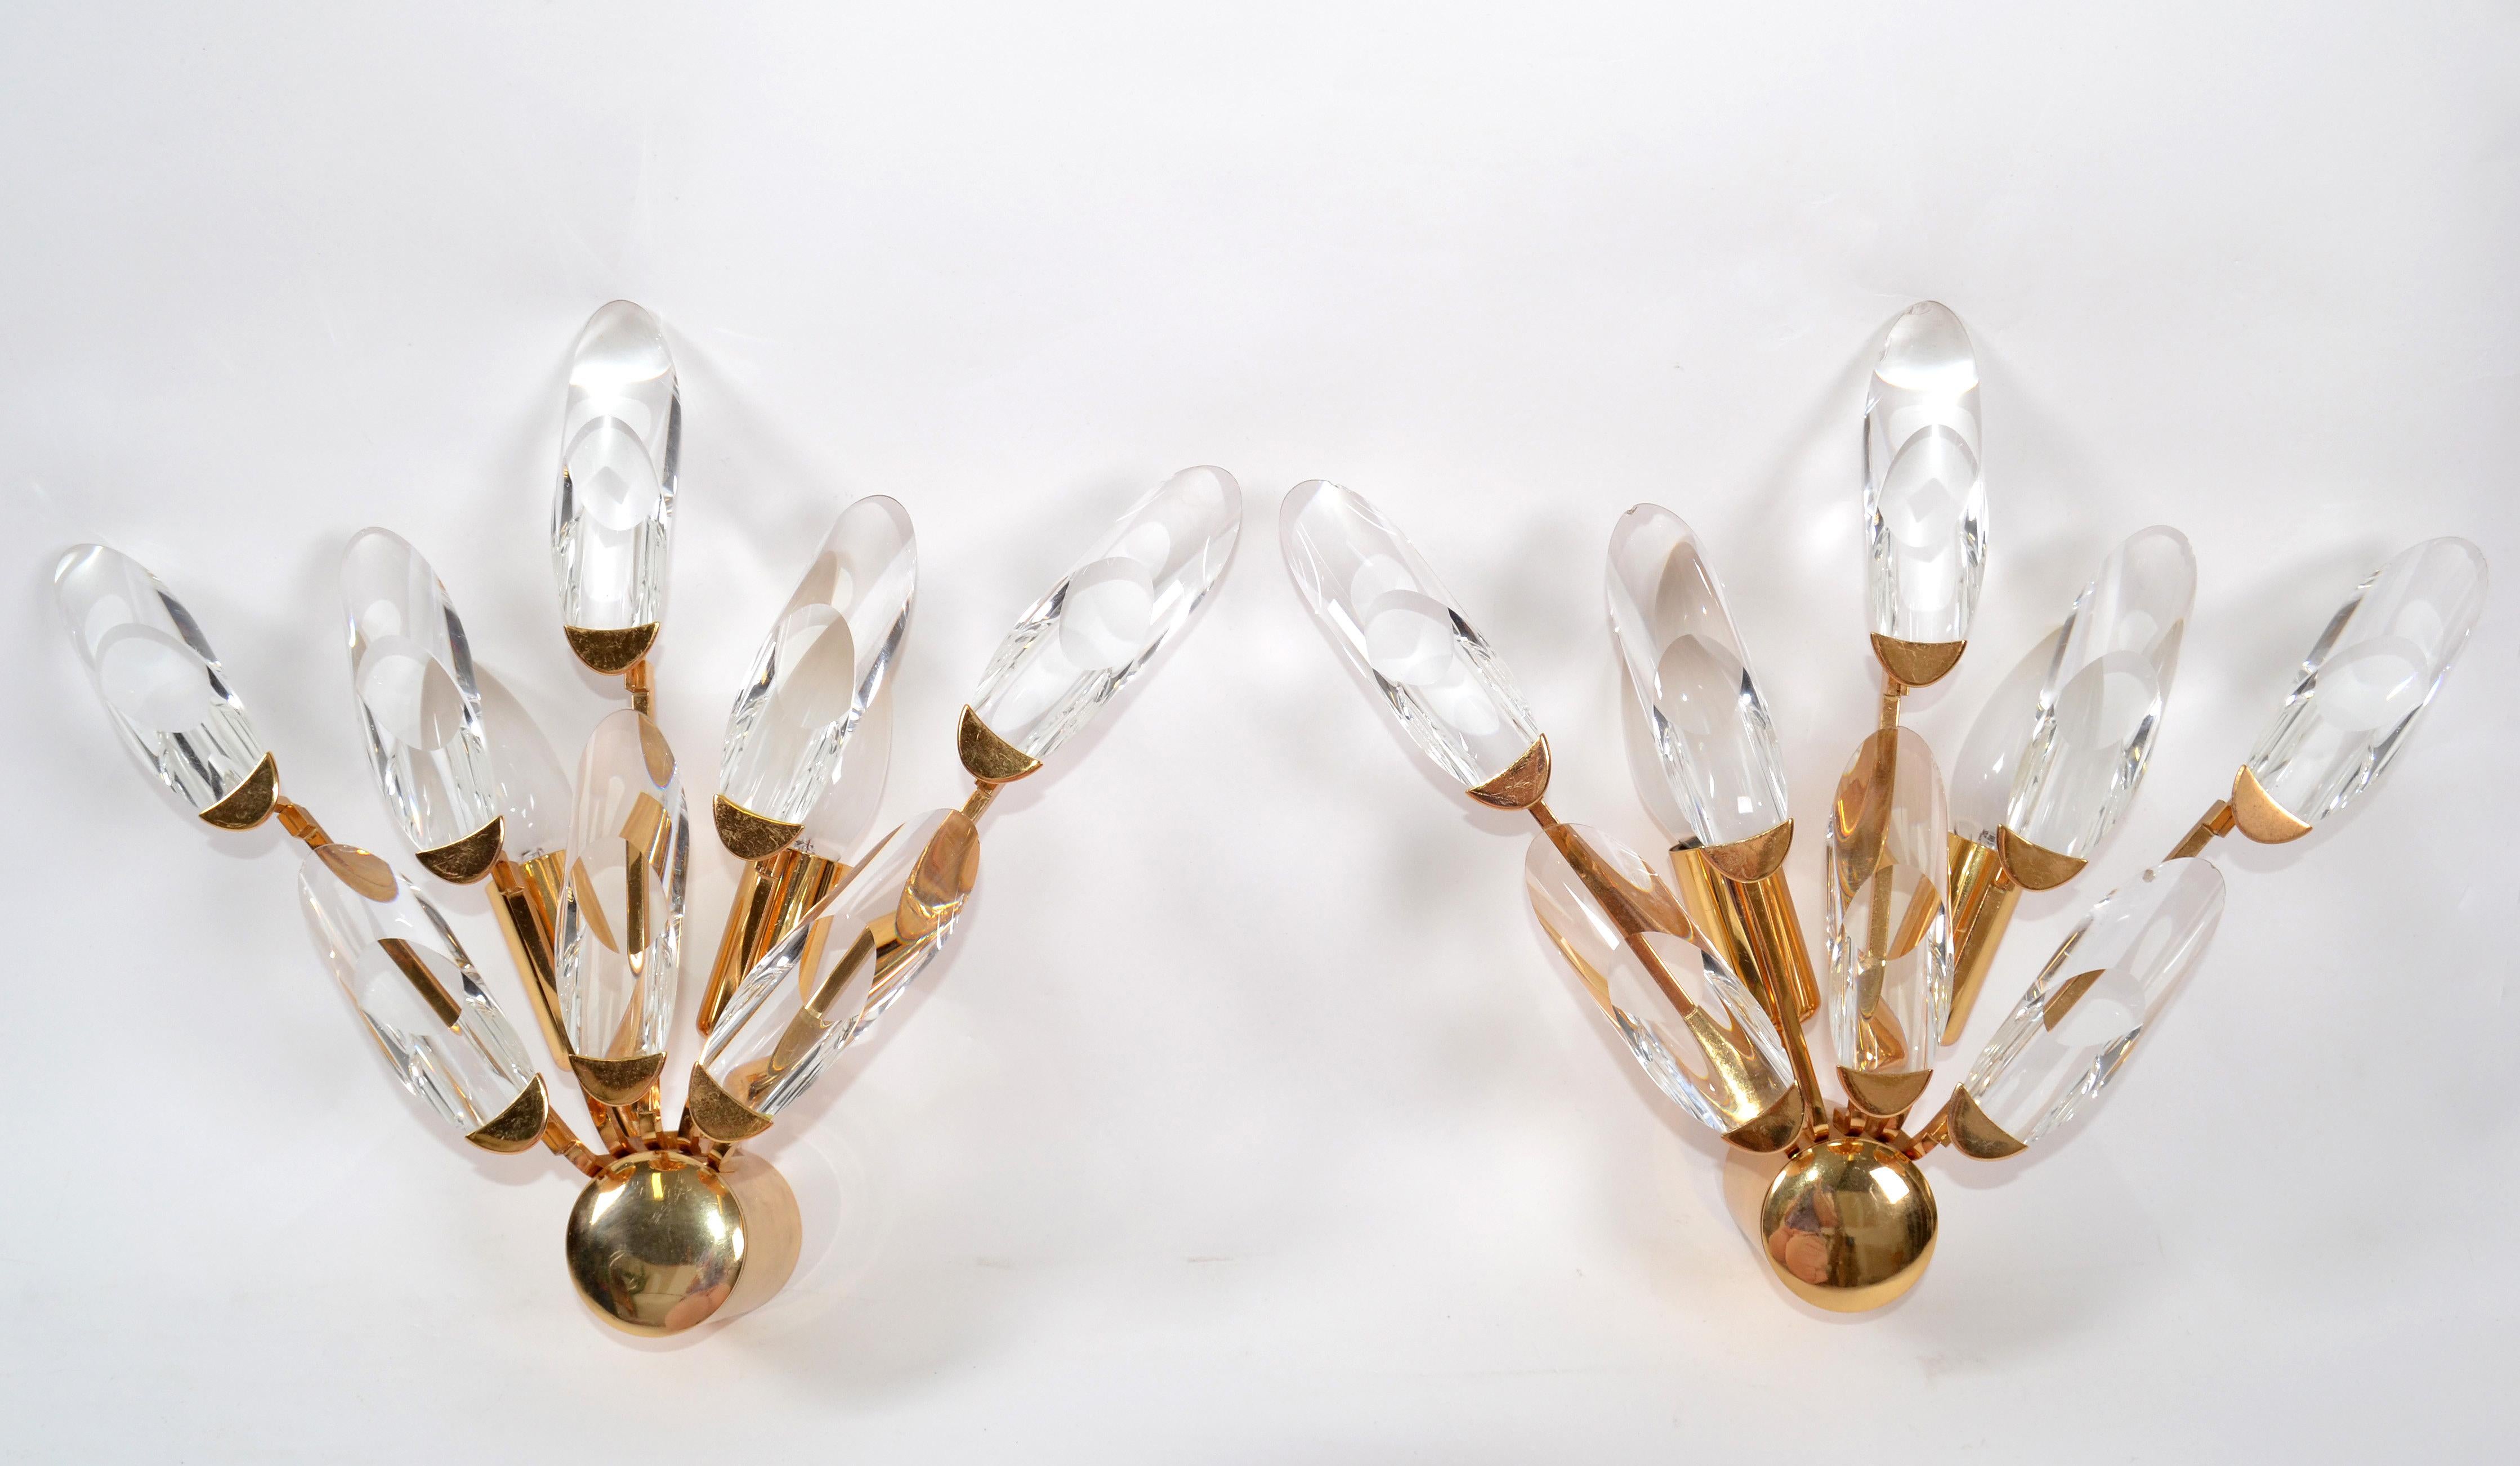 Superb pair of Stilkronen sconces, made in Italy, crystal glass and gold finish.
Each sconce takes two 40 watt max. light bulb.
US rewired and in working condition.
  